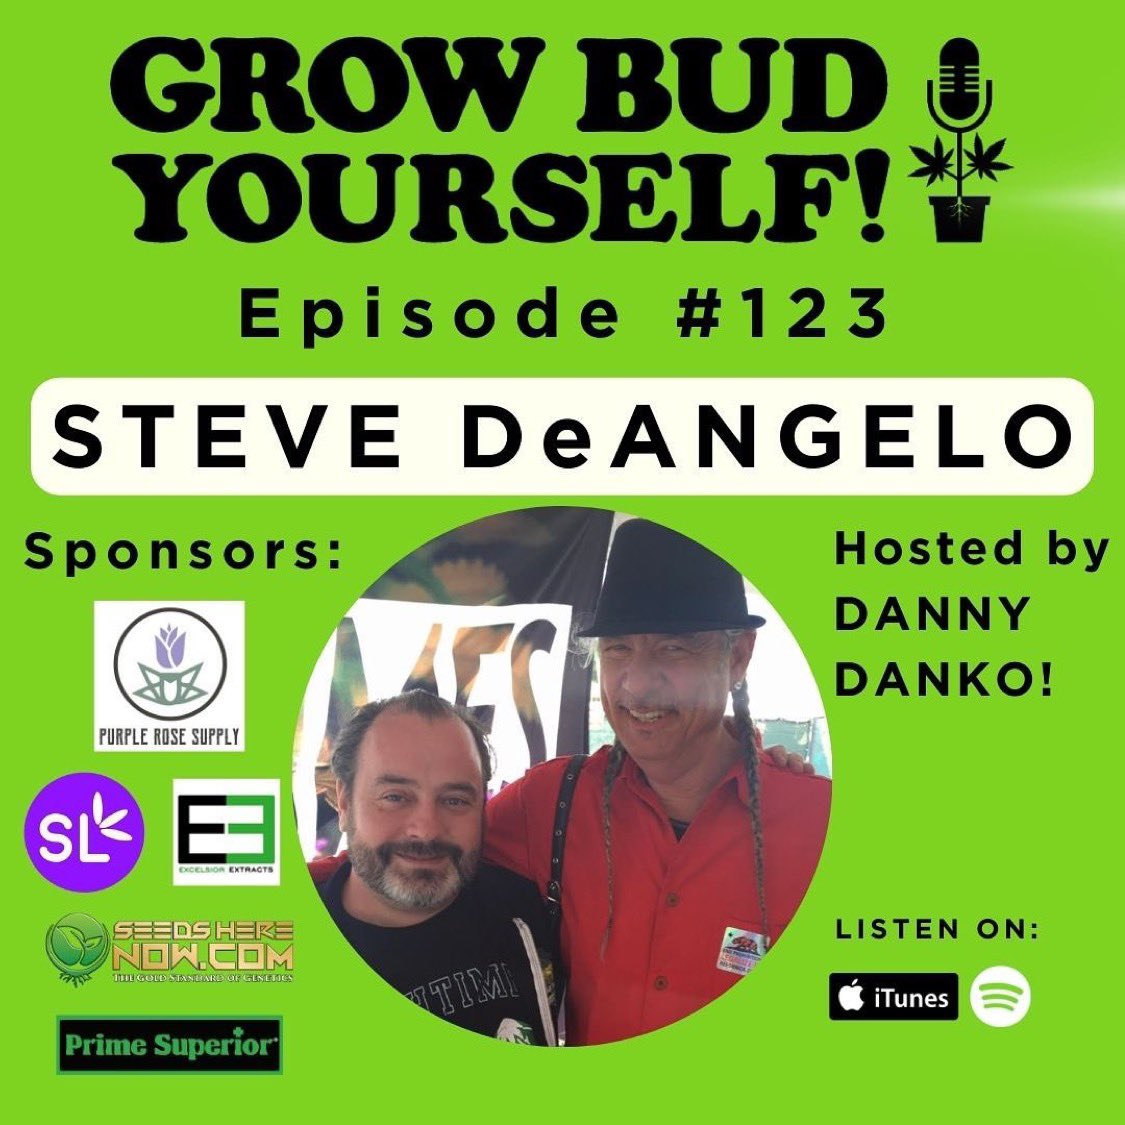 Episode 123 @GrowBudYourself features guest @SteveDeAngelo pioneer of cannabis activism & business discussing his lifelong love of the plant, @lastprisonerprj & Life Is A Ceremony psychedelic retreat in Jamaica @rastavillages Plus Strain Cal-Mag & grow Q&A shows.acast.com/freeweed/episo…